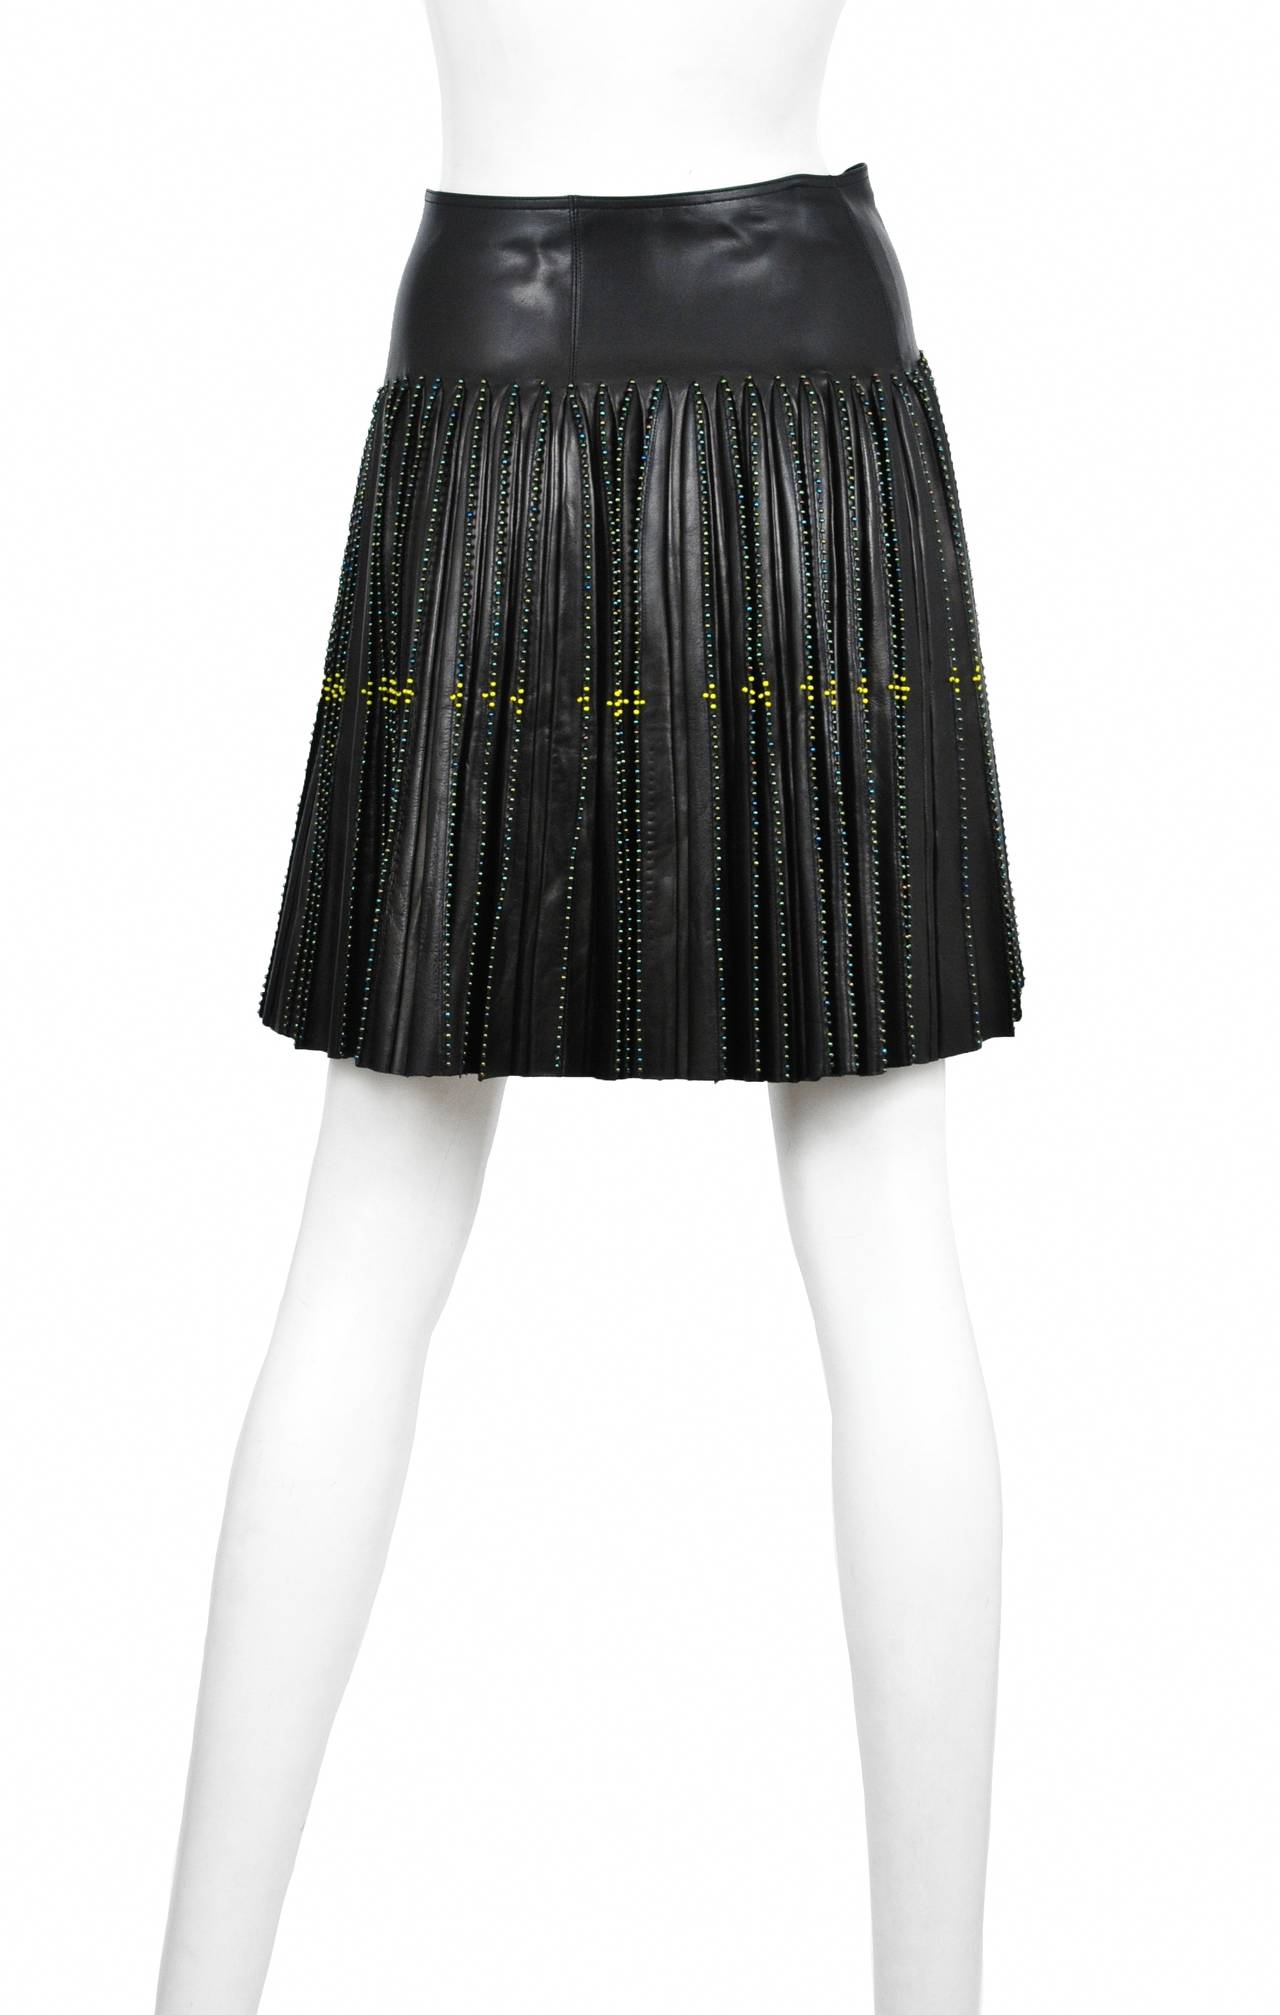 Vintage Azzedine Alaia leather skirt with full pleated wrap detail, beaded trim finish, and buckle belt closure. Circa 2001.